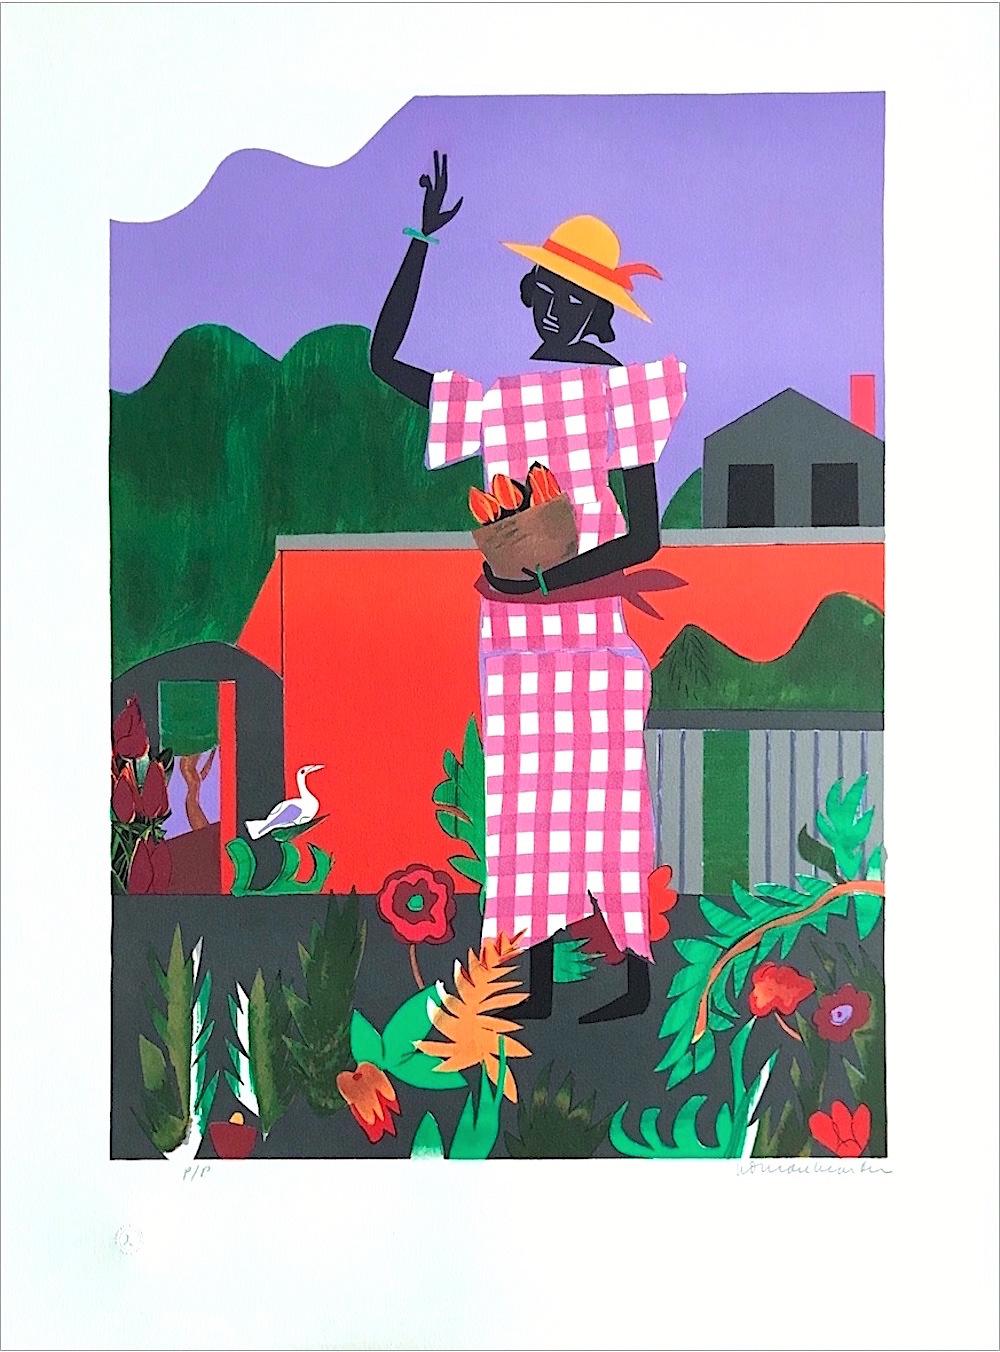 IN THE GARDEN Signed Lithograph, Collage Portrait Black Woman Pink Gingham Dress